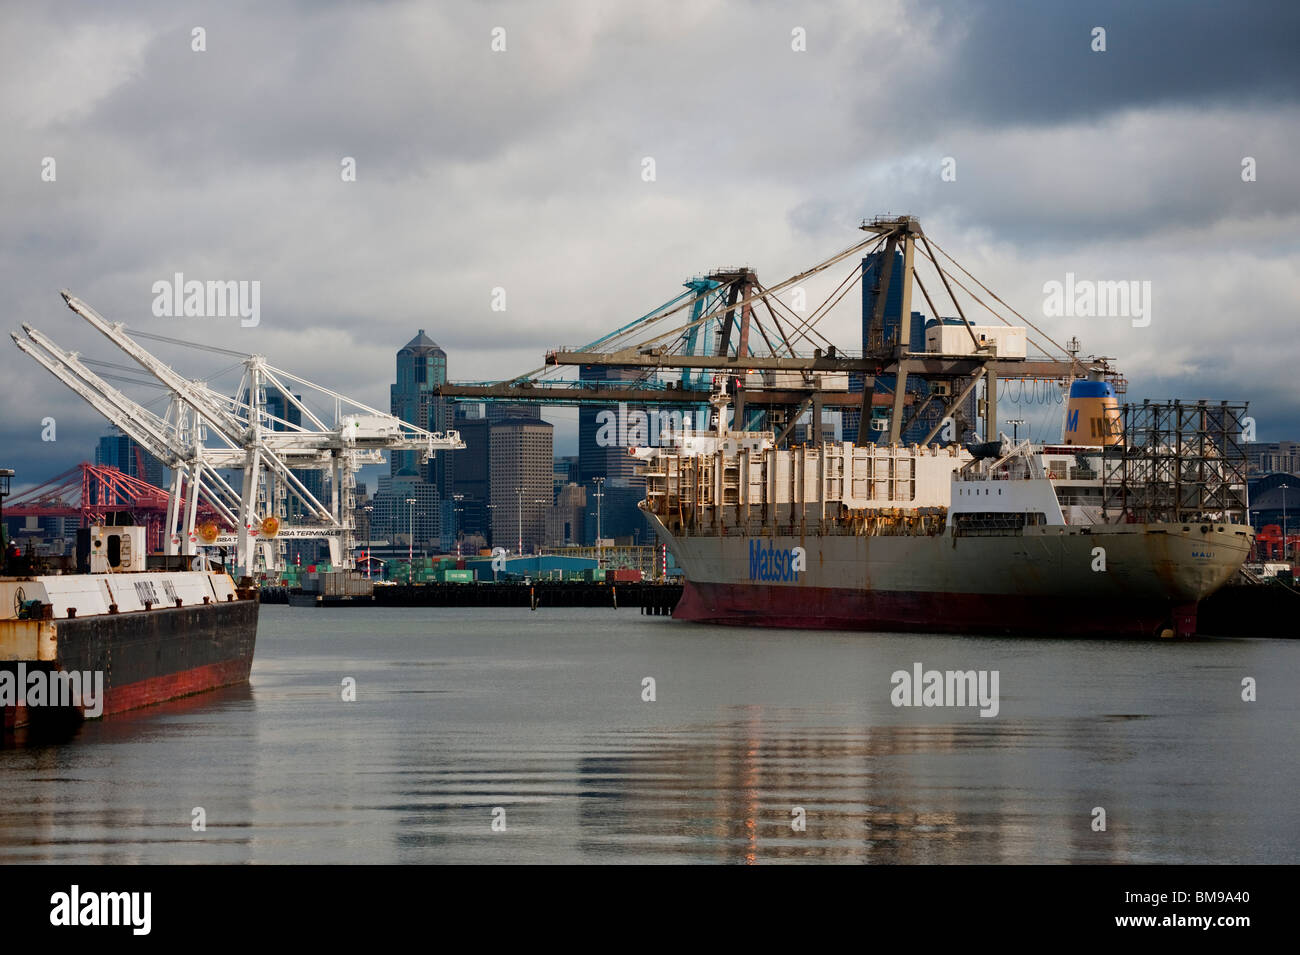 Port of Seattle, Seattle, Washington, USA. Cargo ships are loaded with containers by huge cranes to travel to far ports of call. Stock Photo